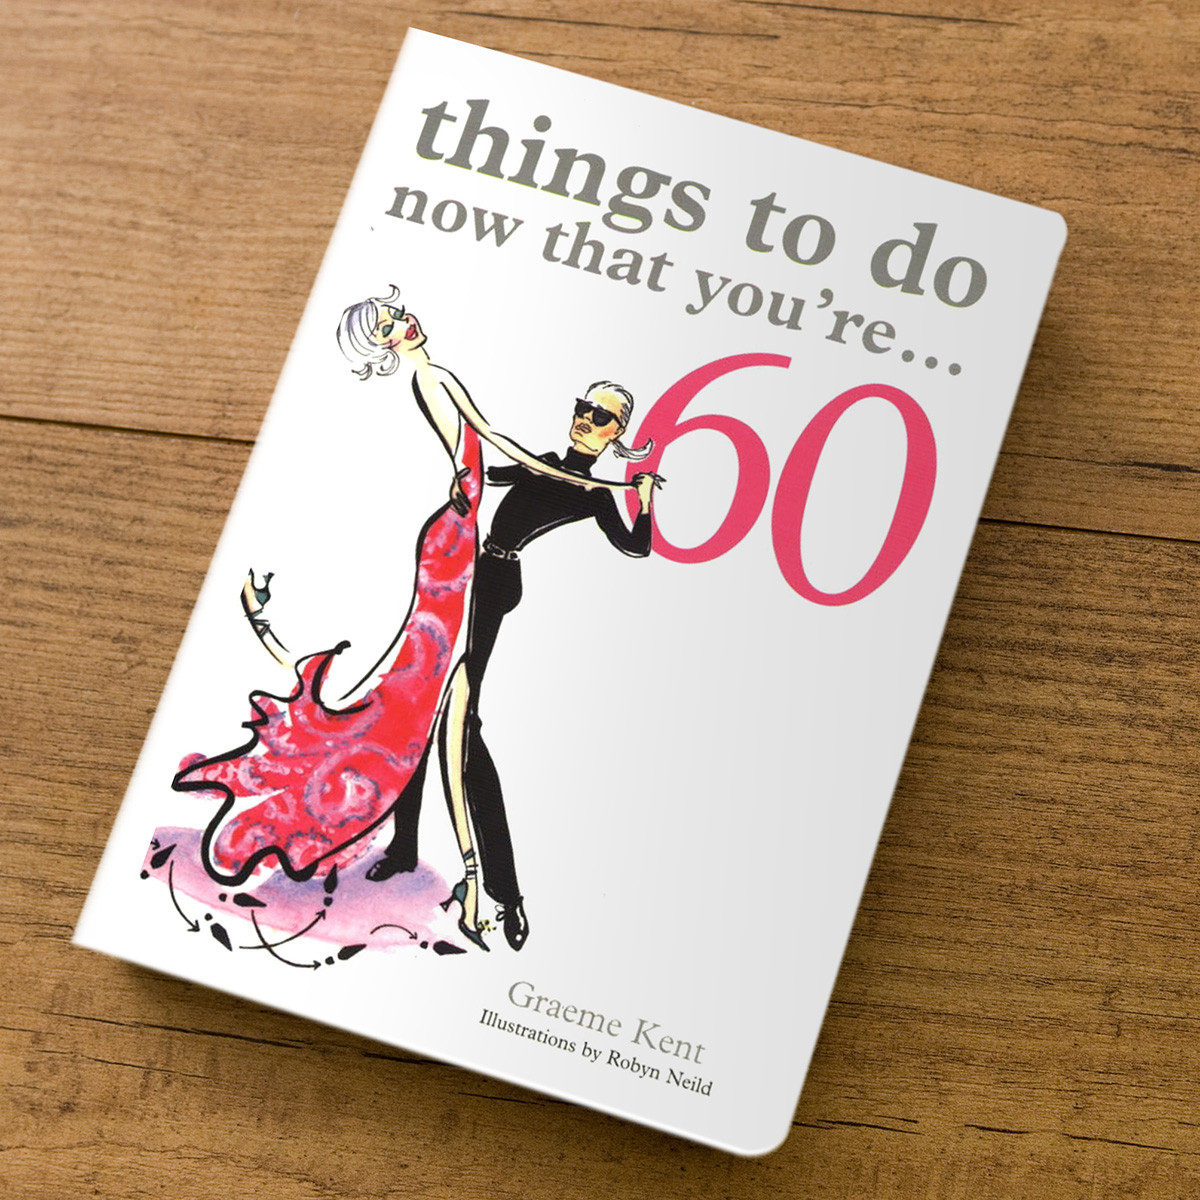 Ideas For 60Th Birthday Gift
 Things To Do Now That You re 60 Gift Book 60th